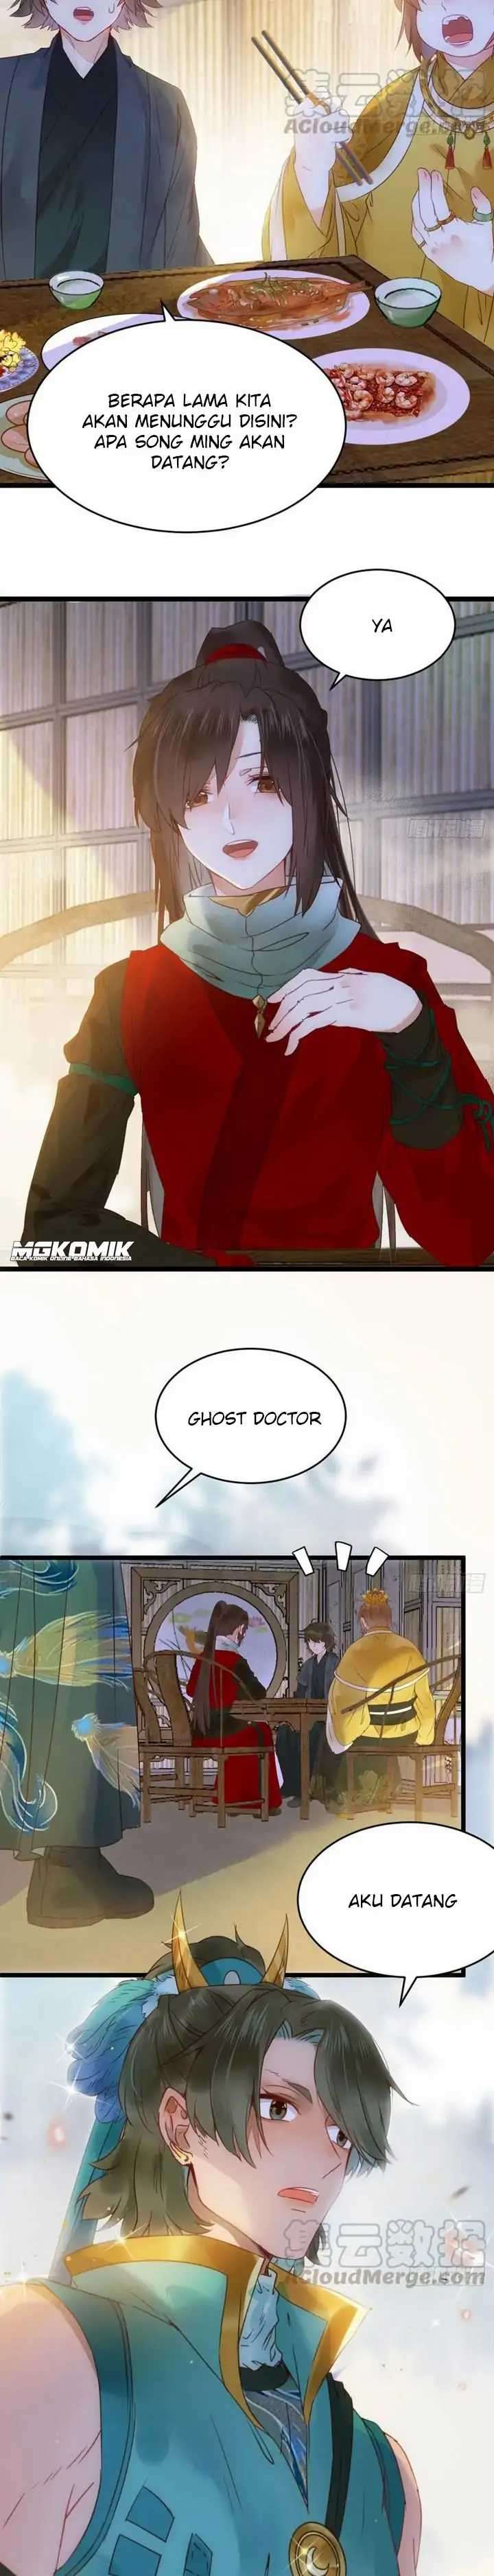 The Ghostly Doctor Chapter 376